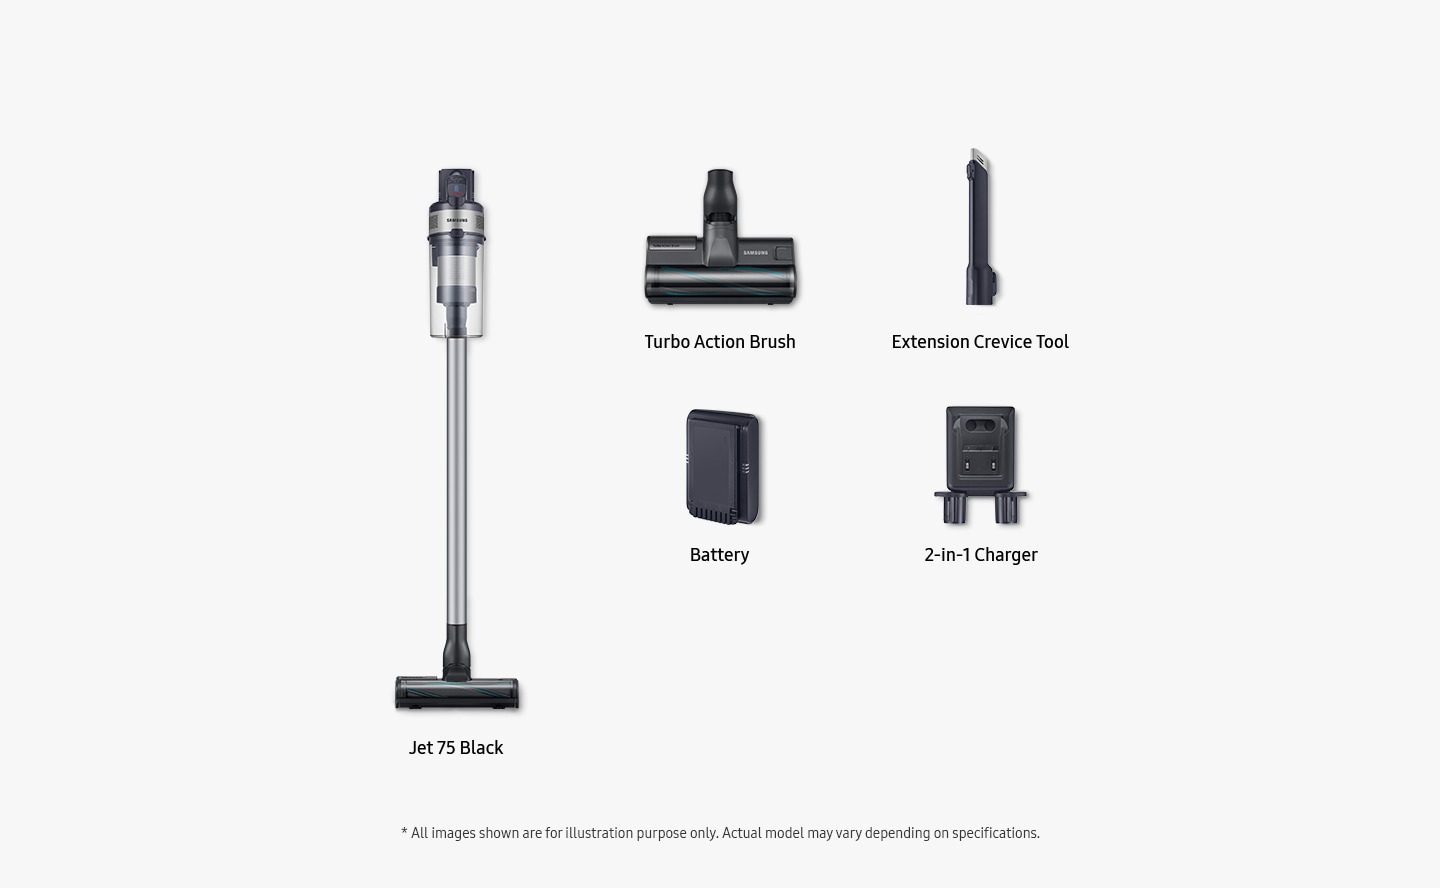 Items included inbox shown: Jet 75 black, turbo action brush, extension crevice tool, battery and 2-in-1 charger.
* All images shown are for illustration purpose only. Actual model may vary depending on specifications.